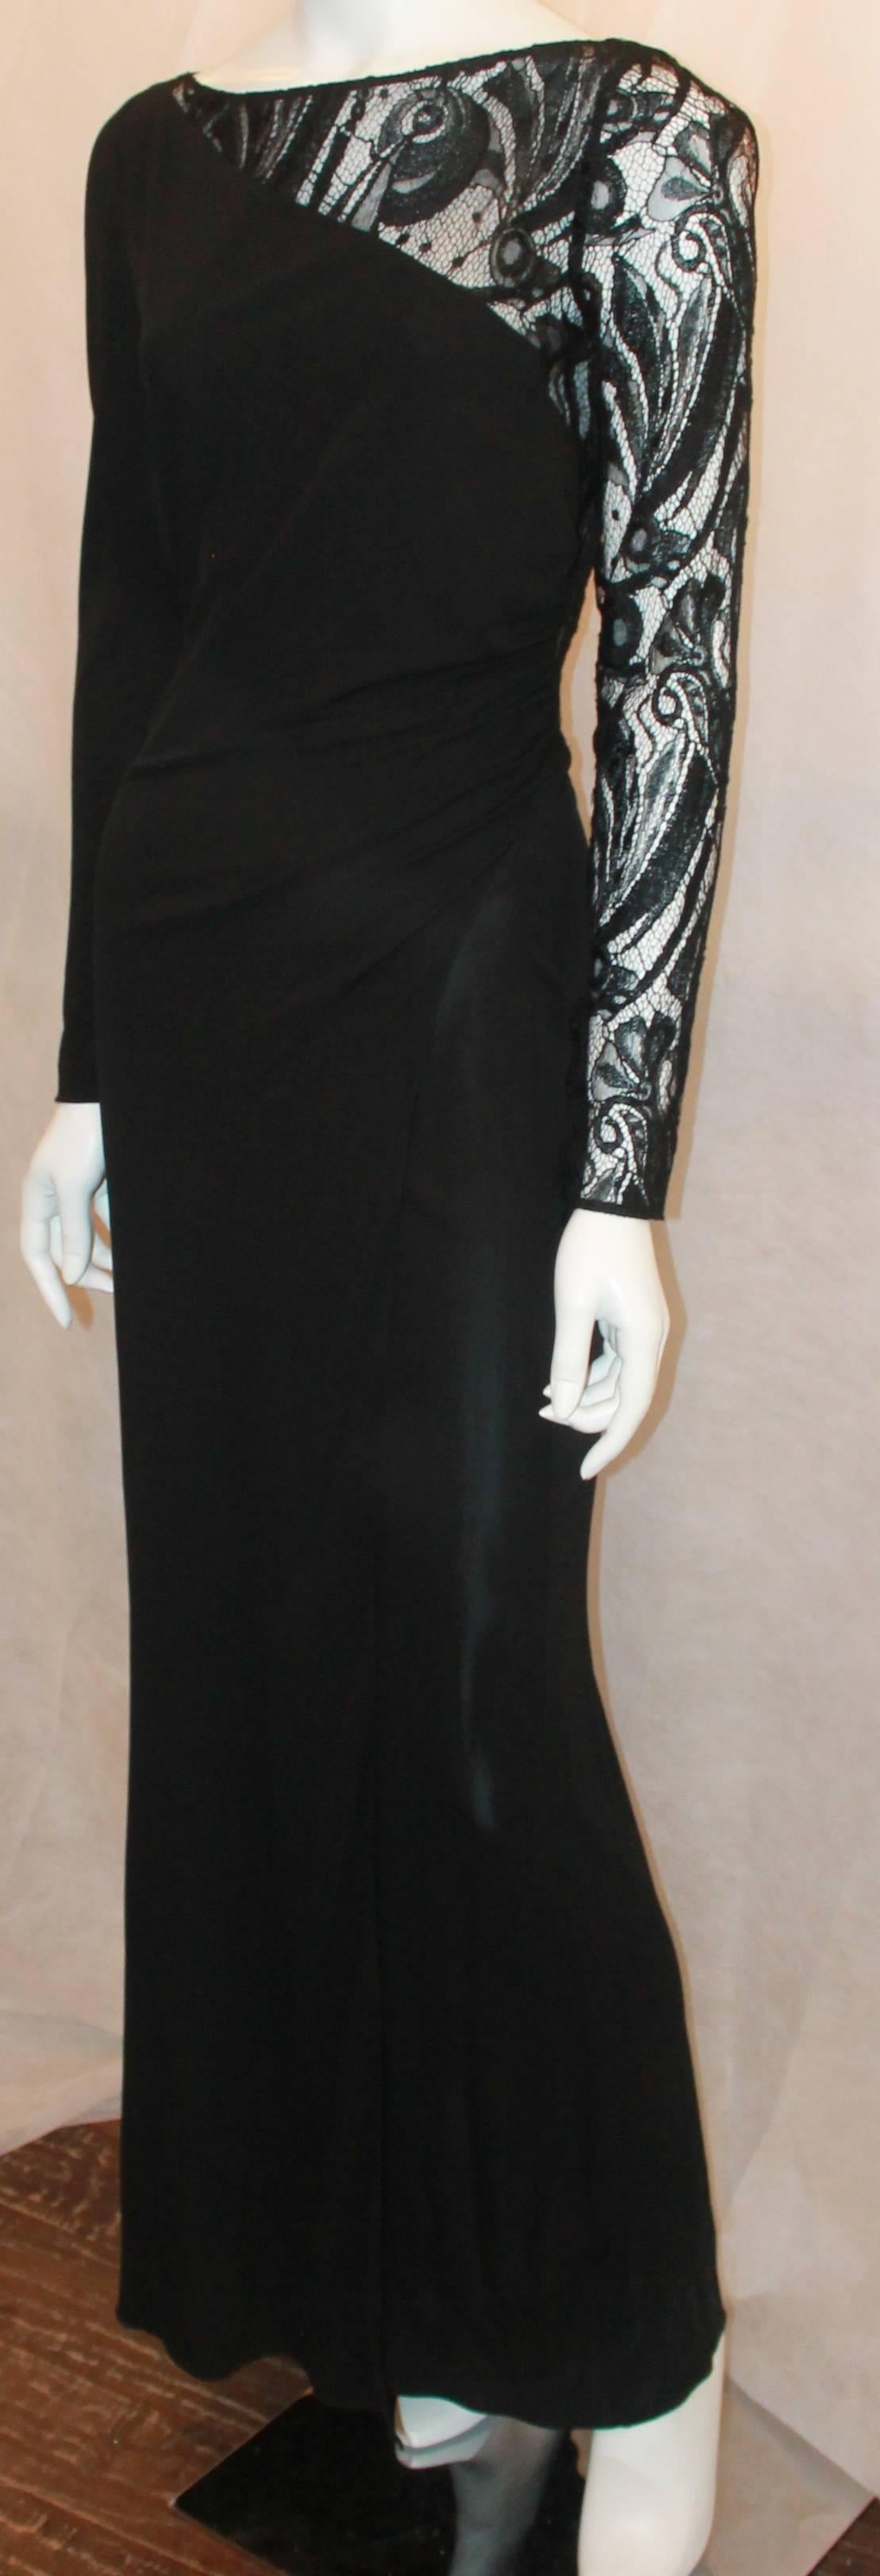 Emilio Pucci Black Silk Jersey and Lace Long Sleeve Wrap Gown - 8.  This gown is in excellent condition.  It features a black jersey material, an elegant black lace see through back and left arm, side ruching, and an invisible zipper on the right